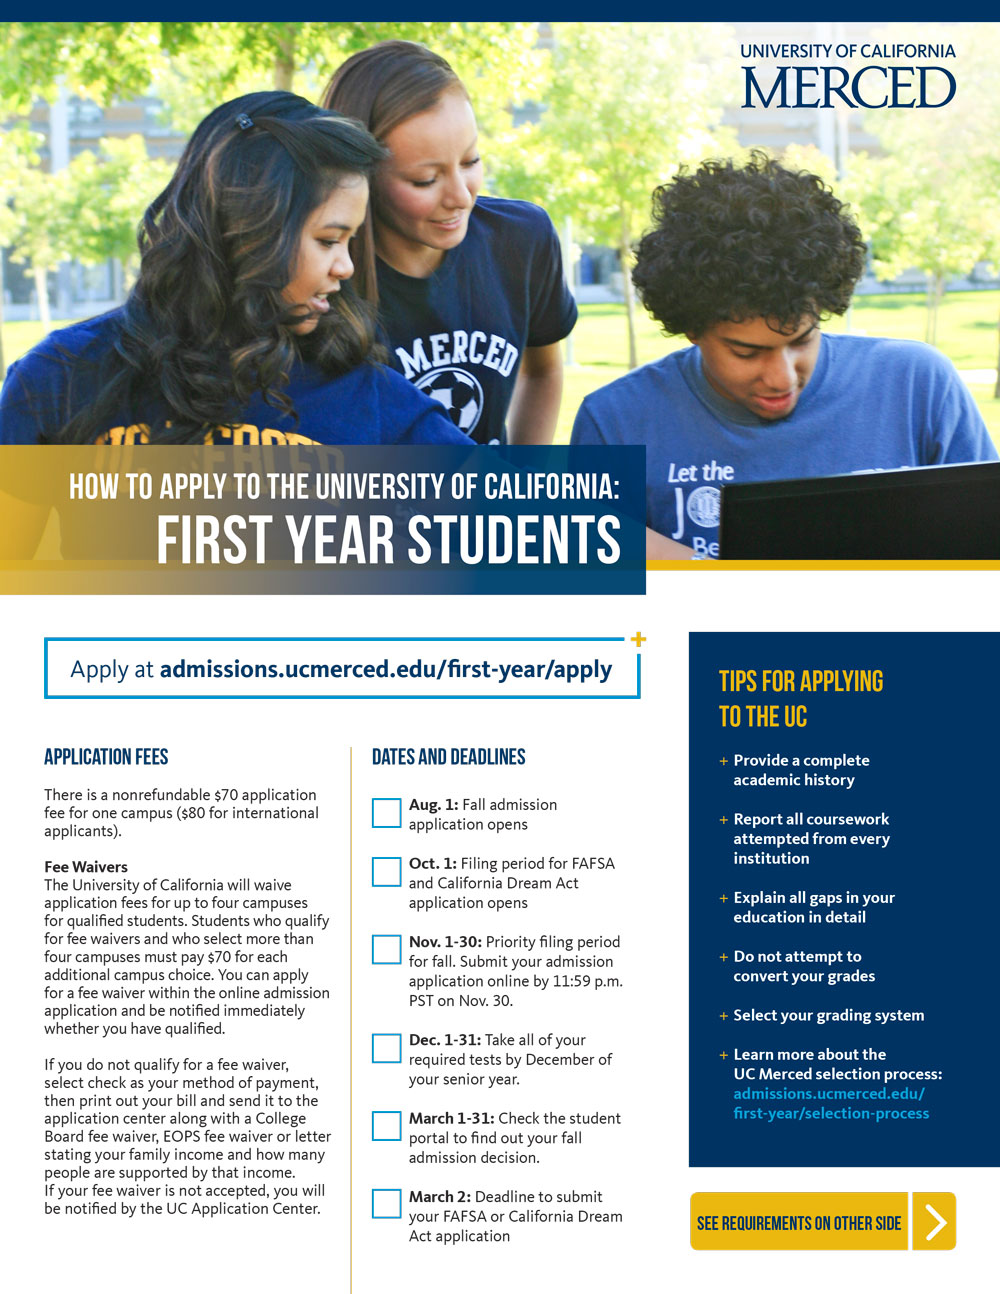 UC Merced How to Apply Flyer - First Year Students